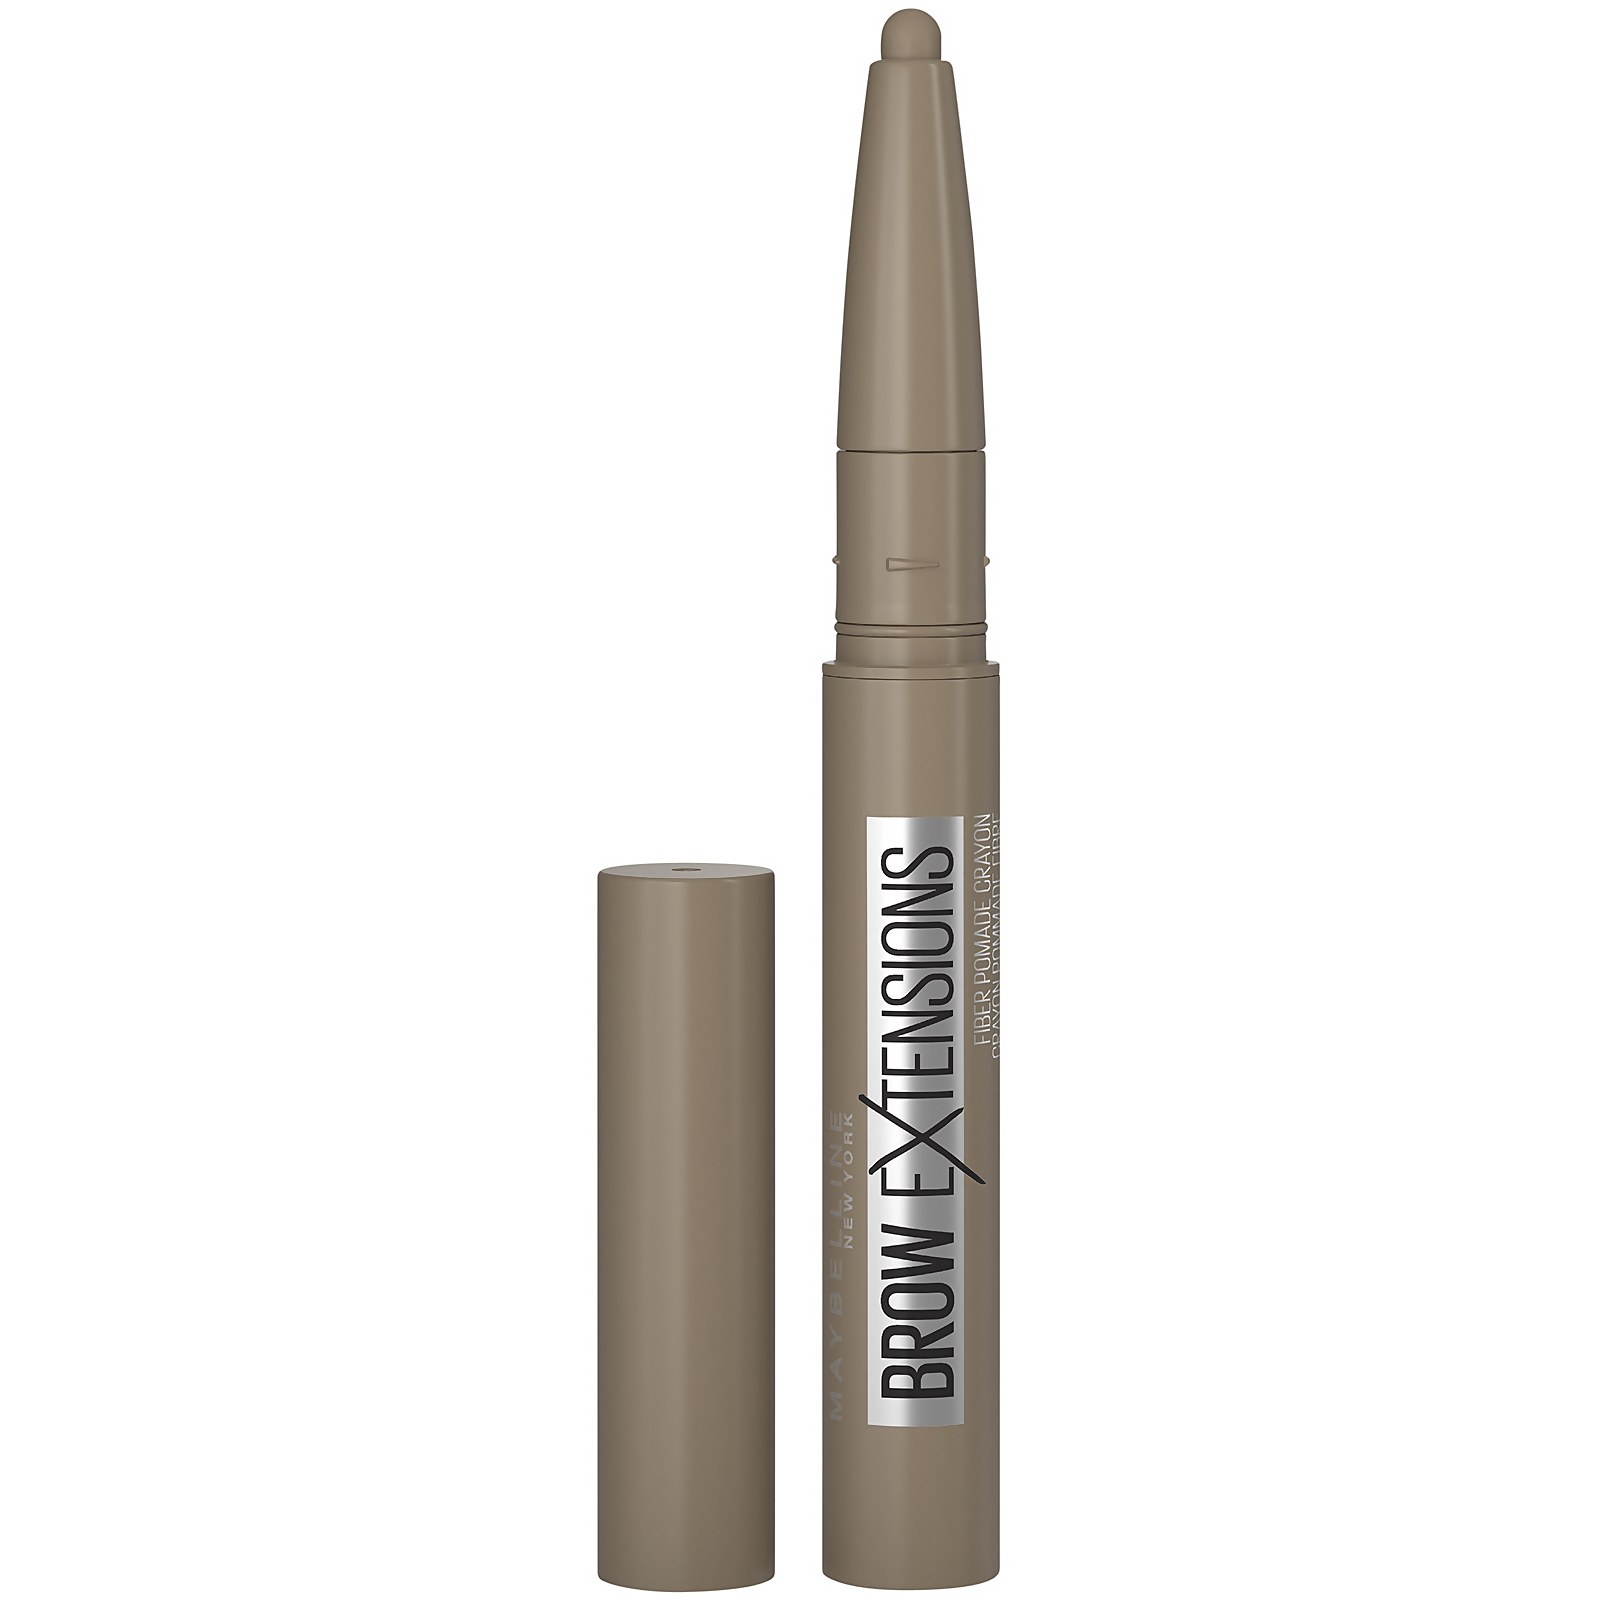 Image of Maybelline Brow Extensions Eyebrow Pomade Crayon 21ml (Various Shades) - Blonde